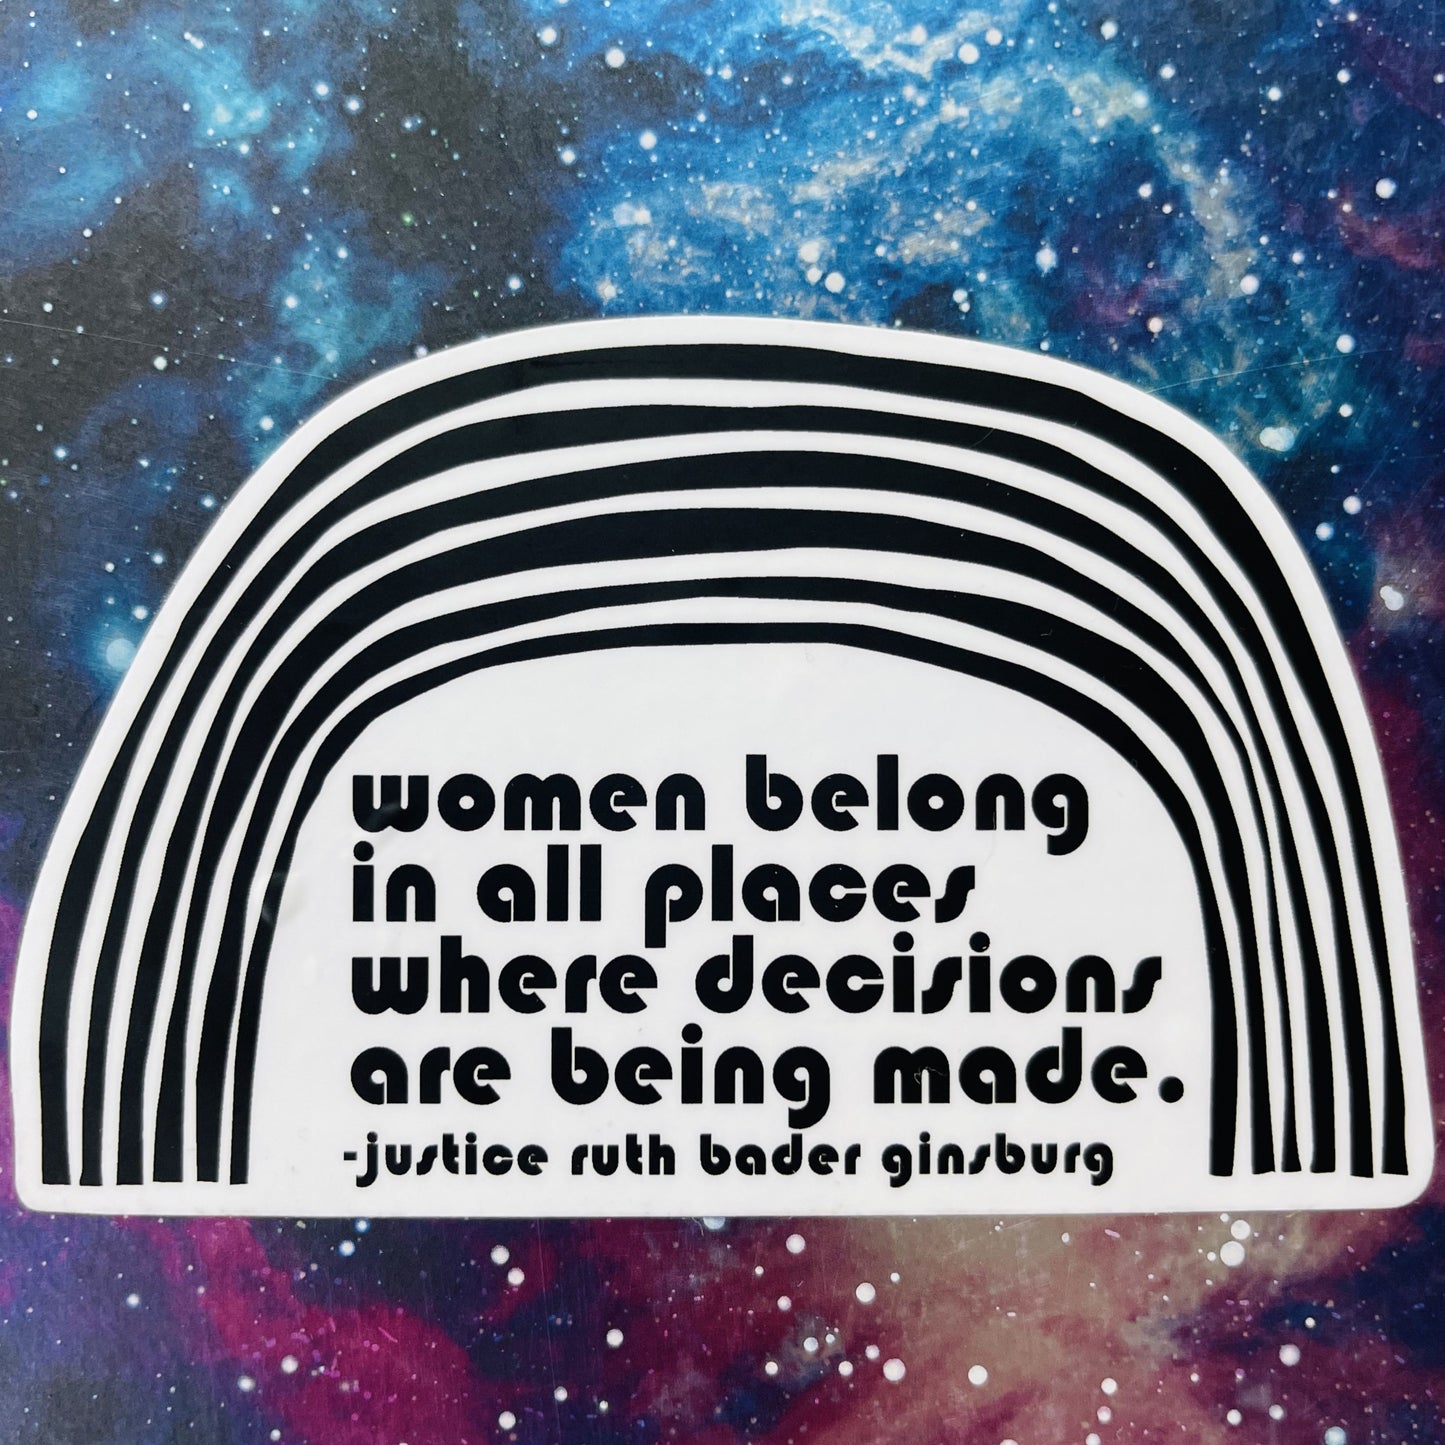 vinyl sticker ruth bader ginsburg women belong in all places where decisions are being made rbg